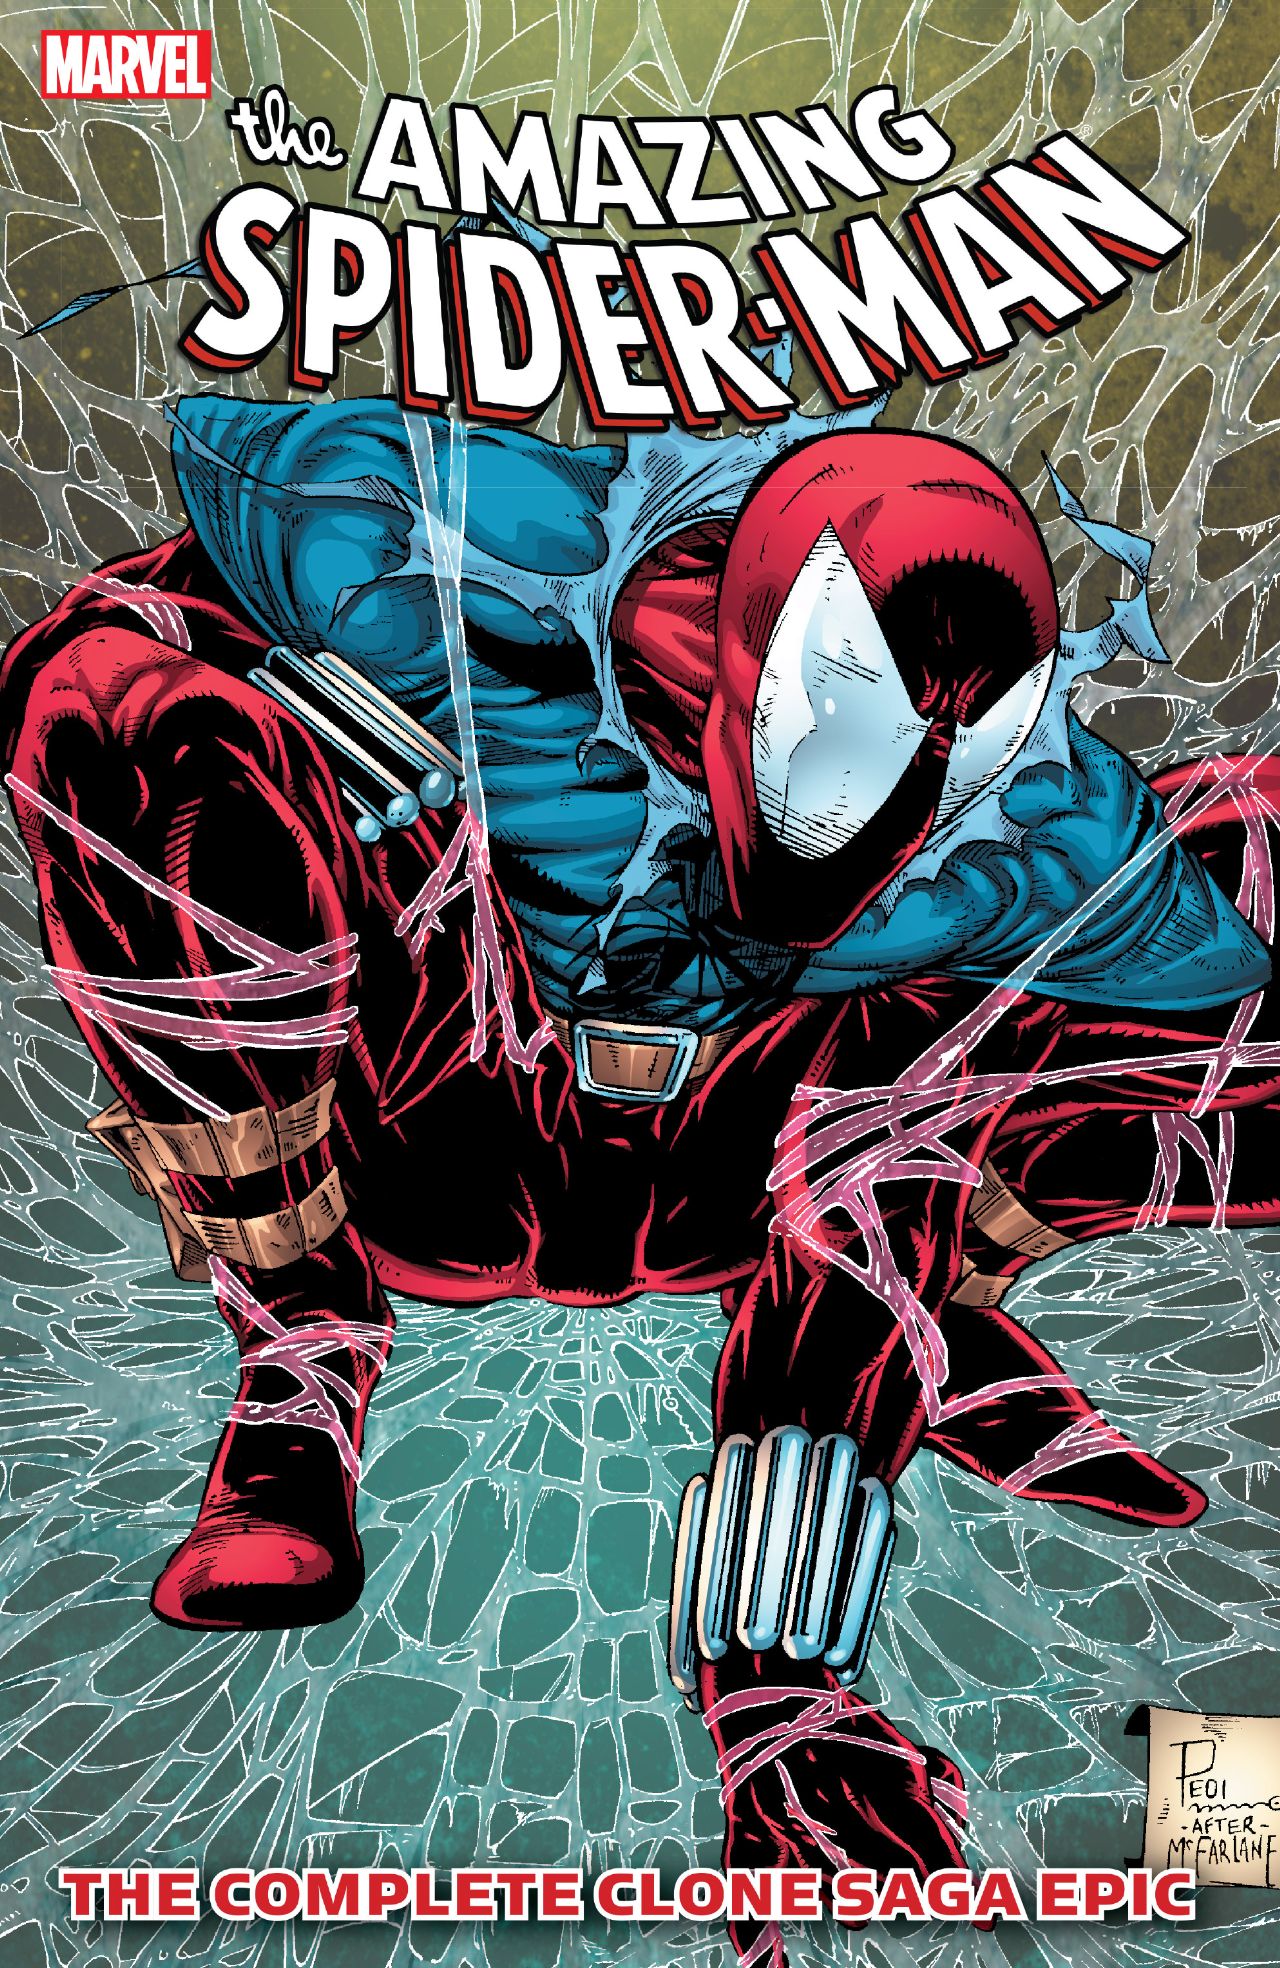 Spider-Man: The Complete Clone Saga Epic Book 3 Review